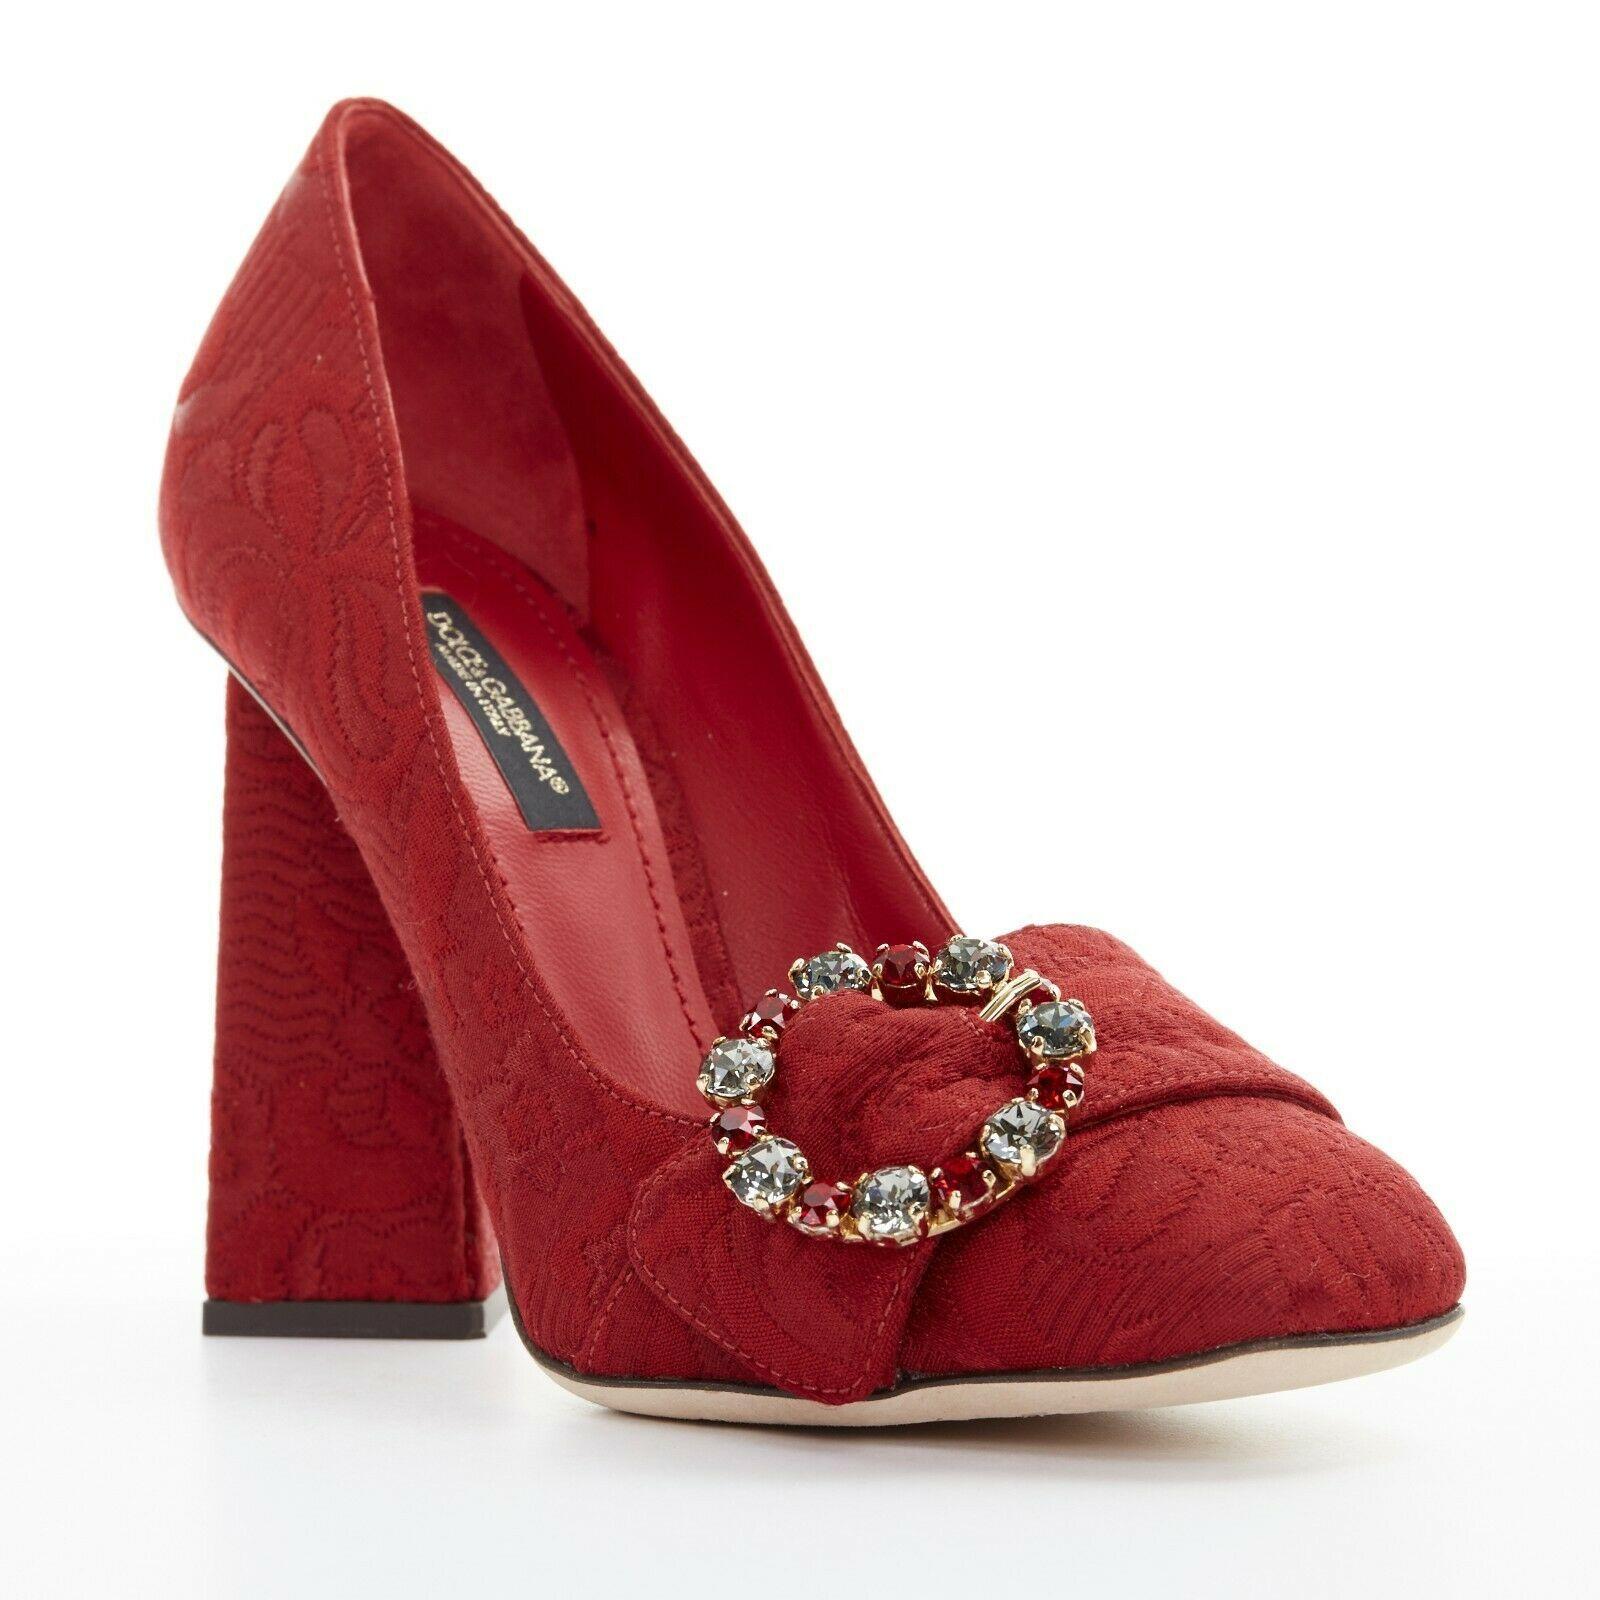 new DOLCE GABBANA red floral jacquard jewel buckle angular block heel EU35
DOLCE &GABBANA
Red floral baroque upper. 
Silver and red jewel circular buckle detail. 
Tonal stitching. 
Square angular high heel. 
Rounded square toe. 
Padded red leather